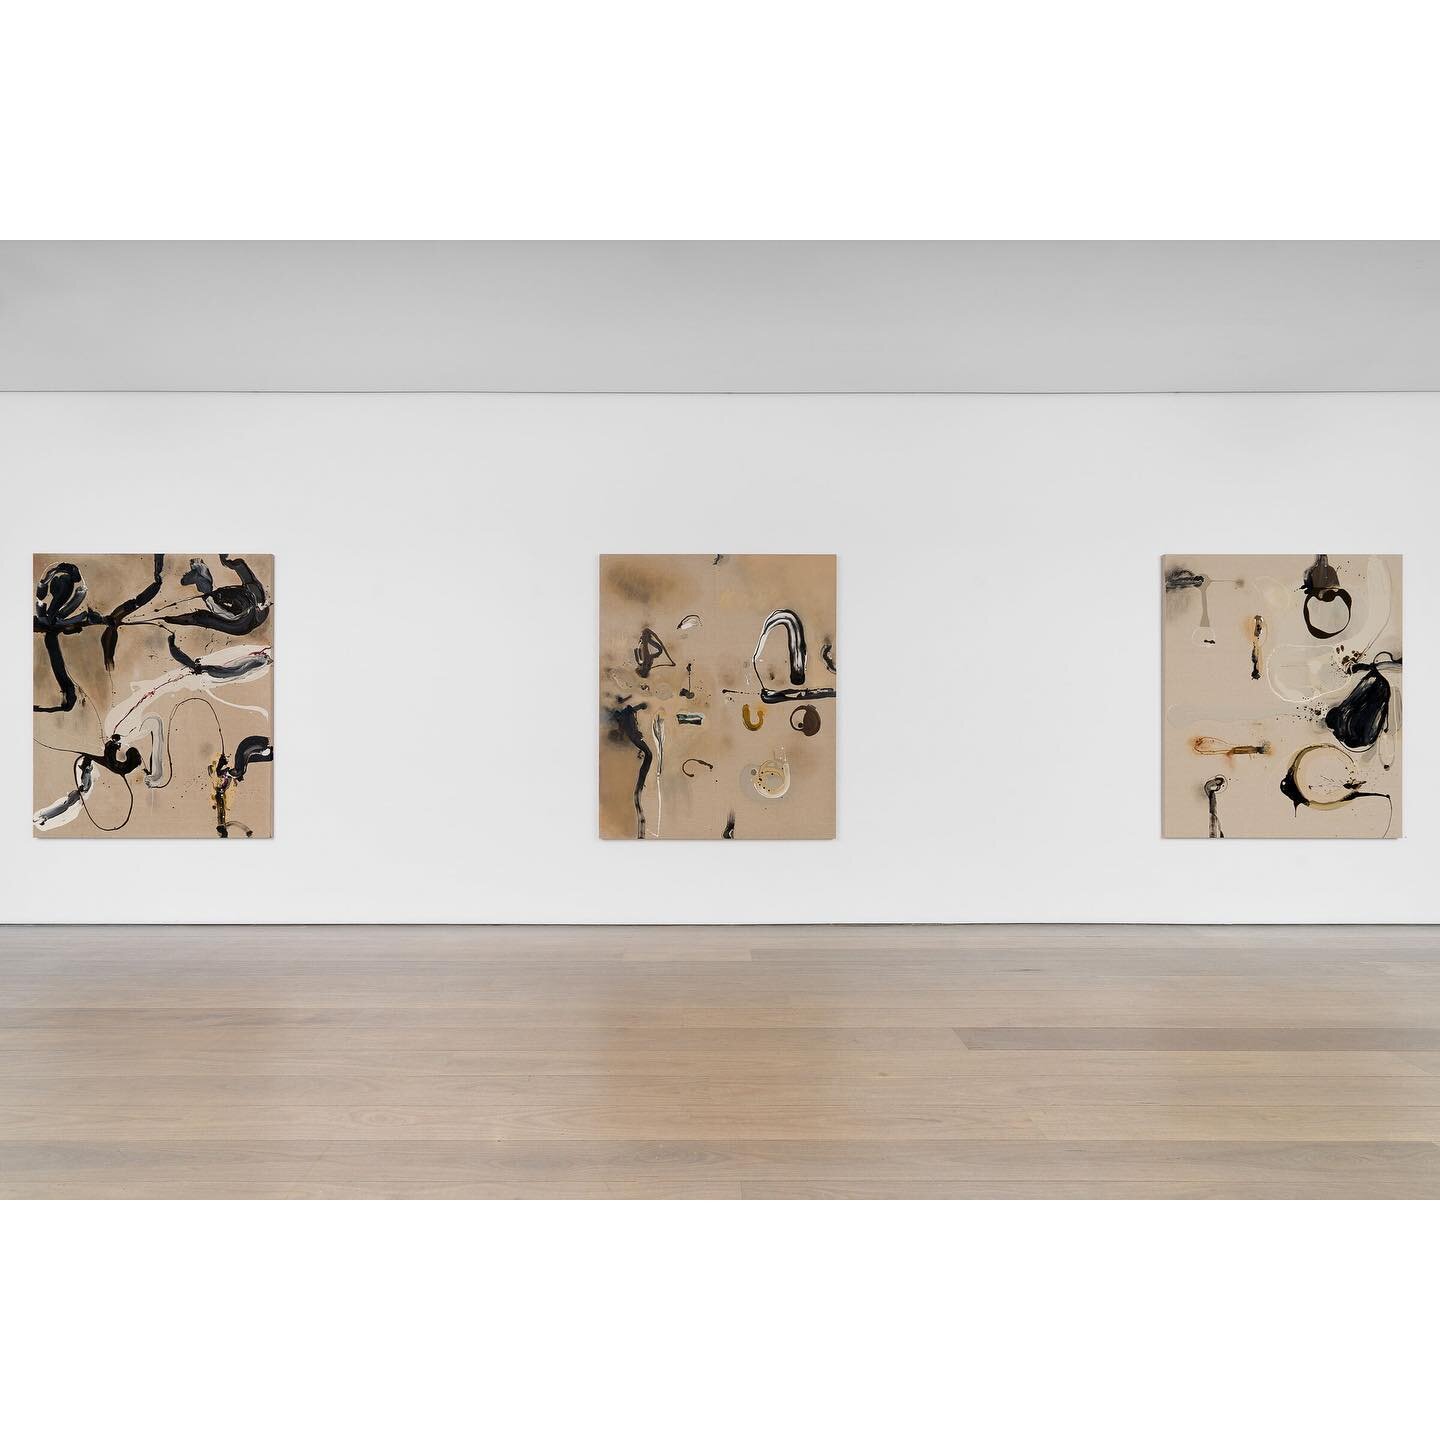 Three good reasons to visit the OLSEN galleries today- LOUISE OLSEN and TUPPY GOODWIN exhibitions at Jersey Rd and the final day to see CREPUSCULE in the OLSEN Annexe conveniently located directly behind on Queen st, Woollahra. 

Galleries open 10-5
